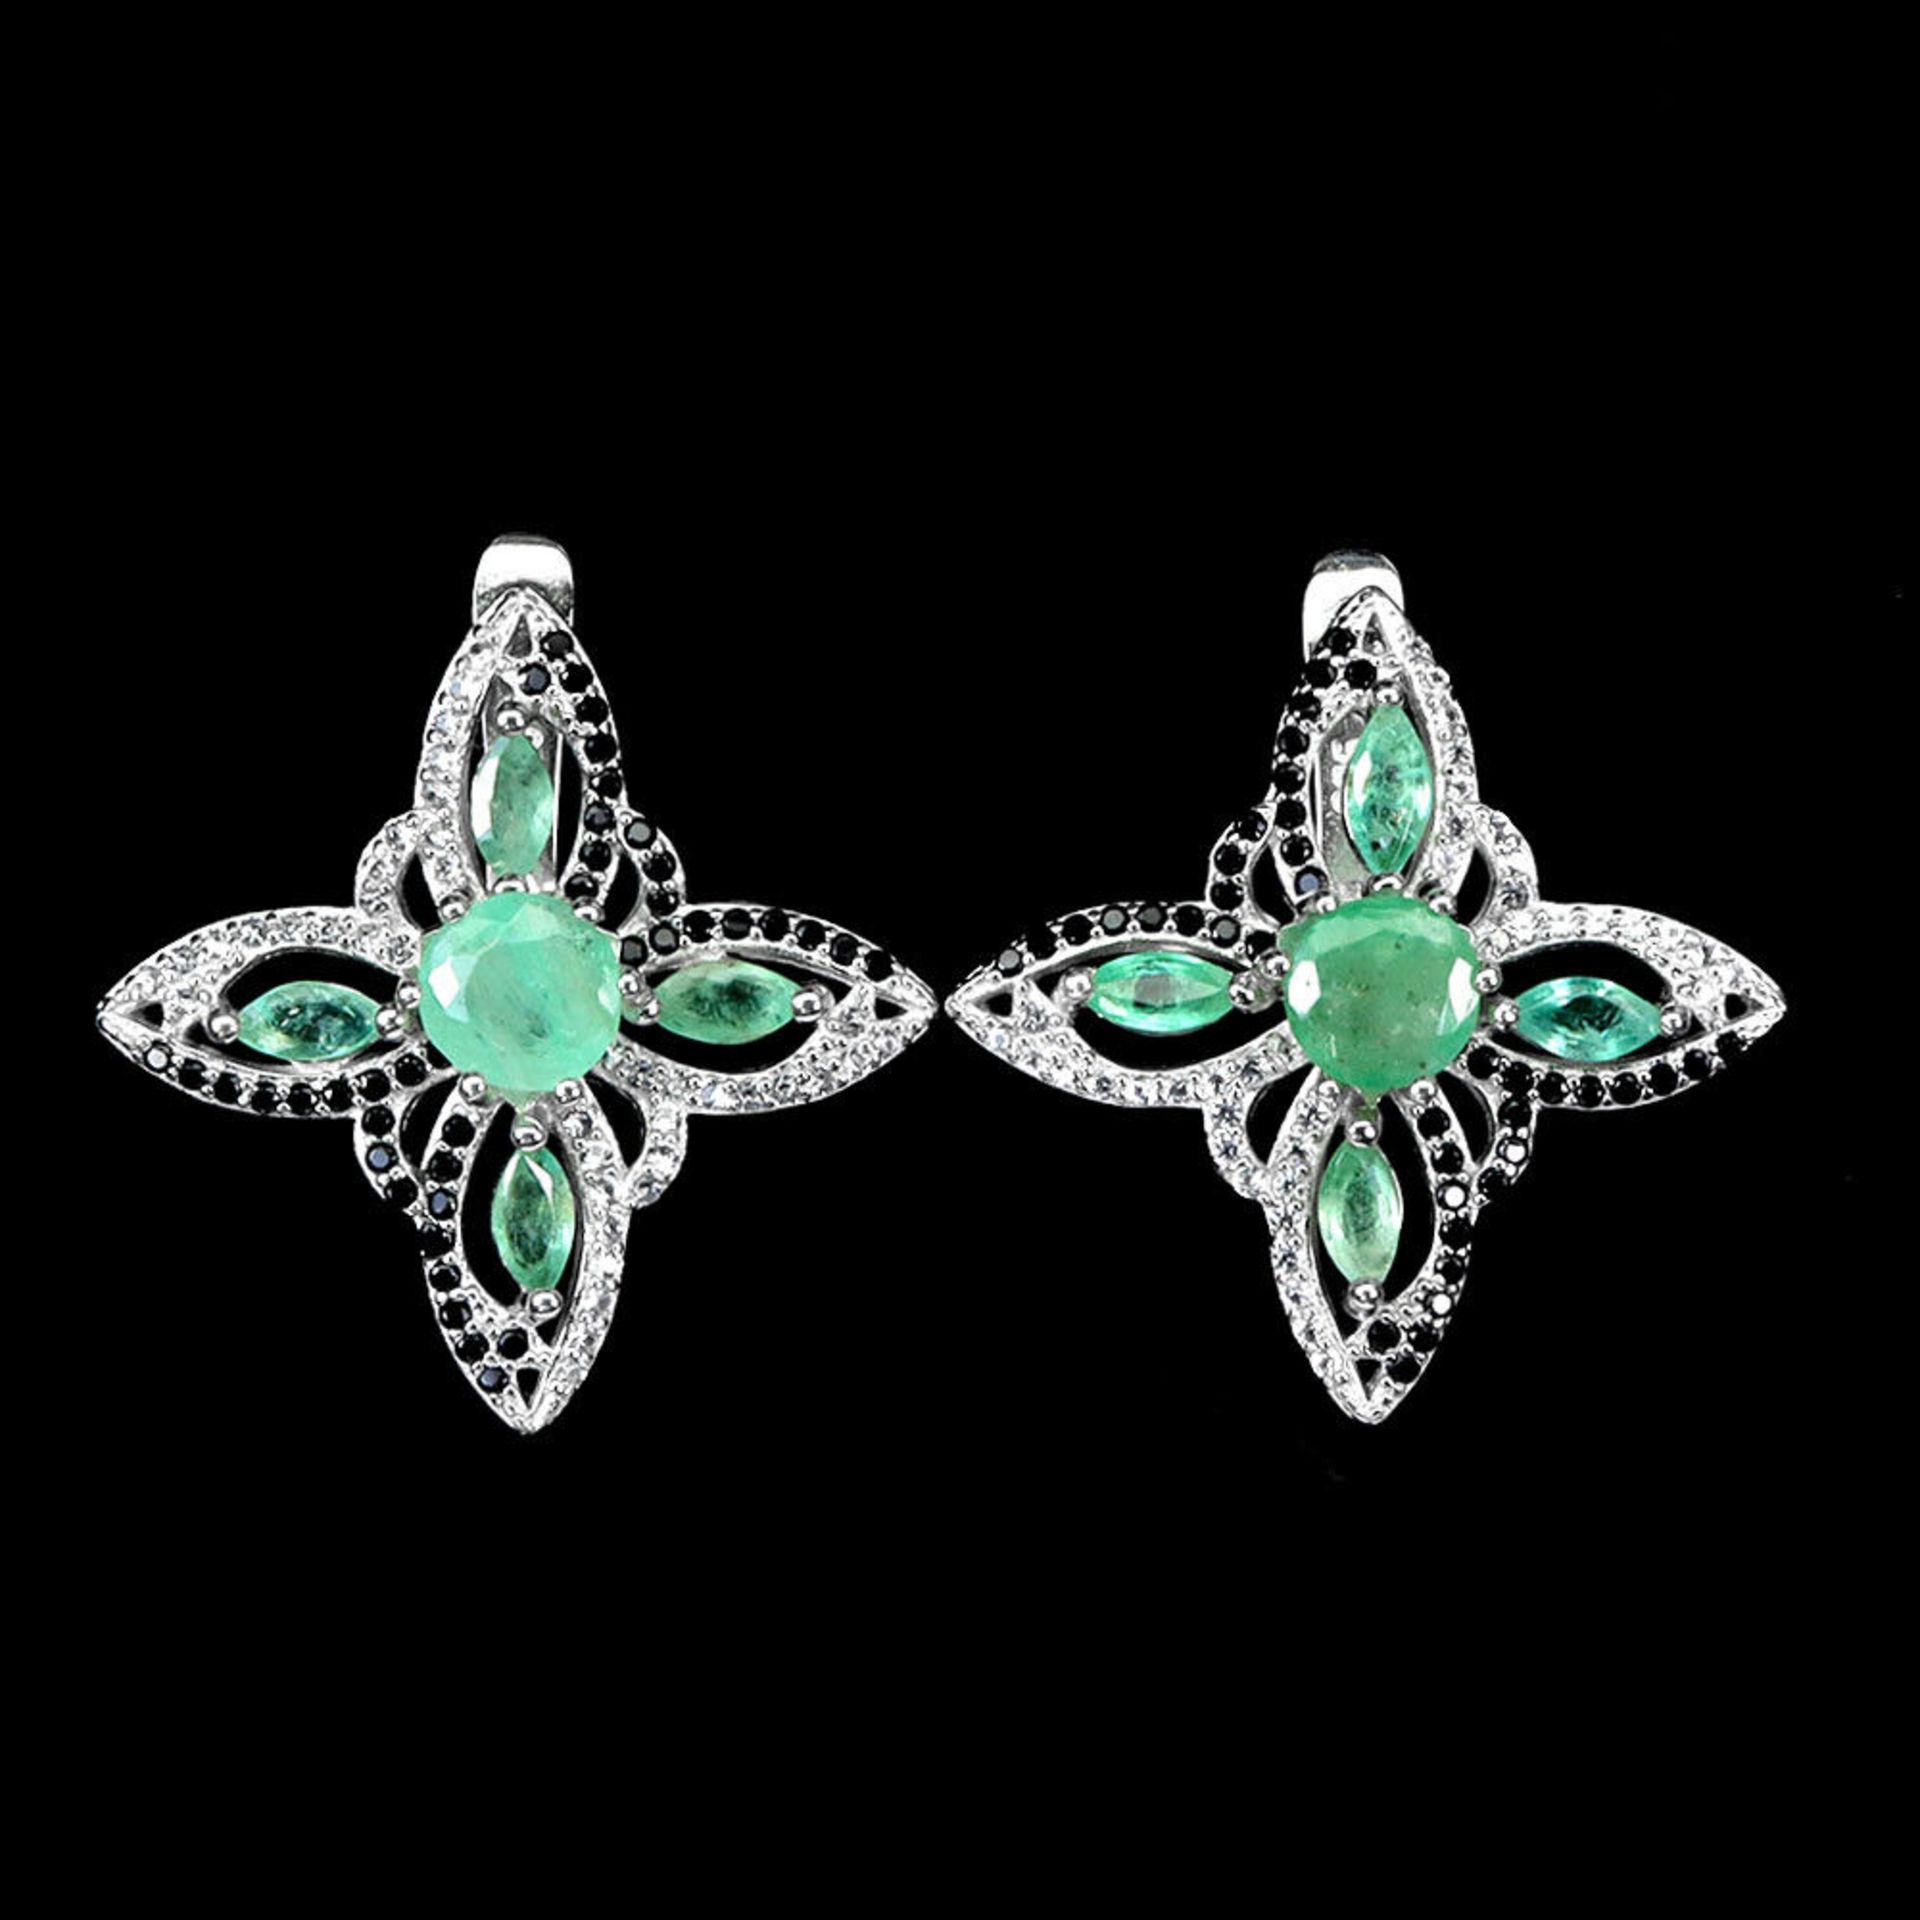 A matching pair of 925 silver earrings set with emeralds and black spinels, L. 2.6cm.